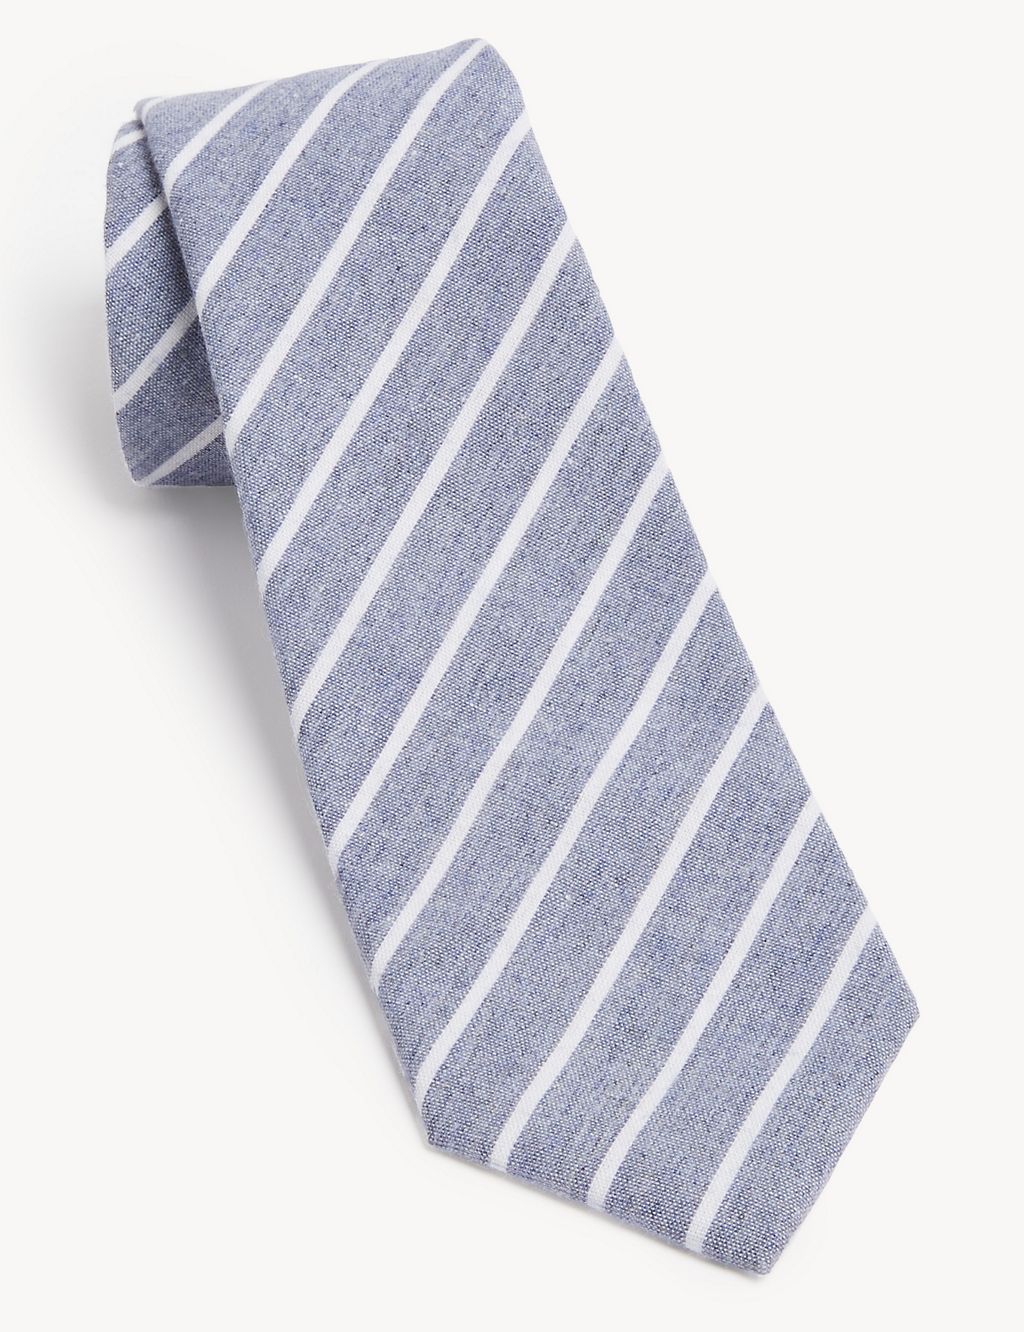 Striped Tie 3 of 4